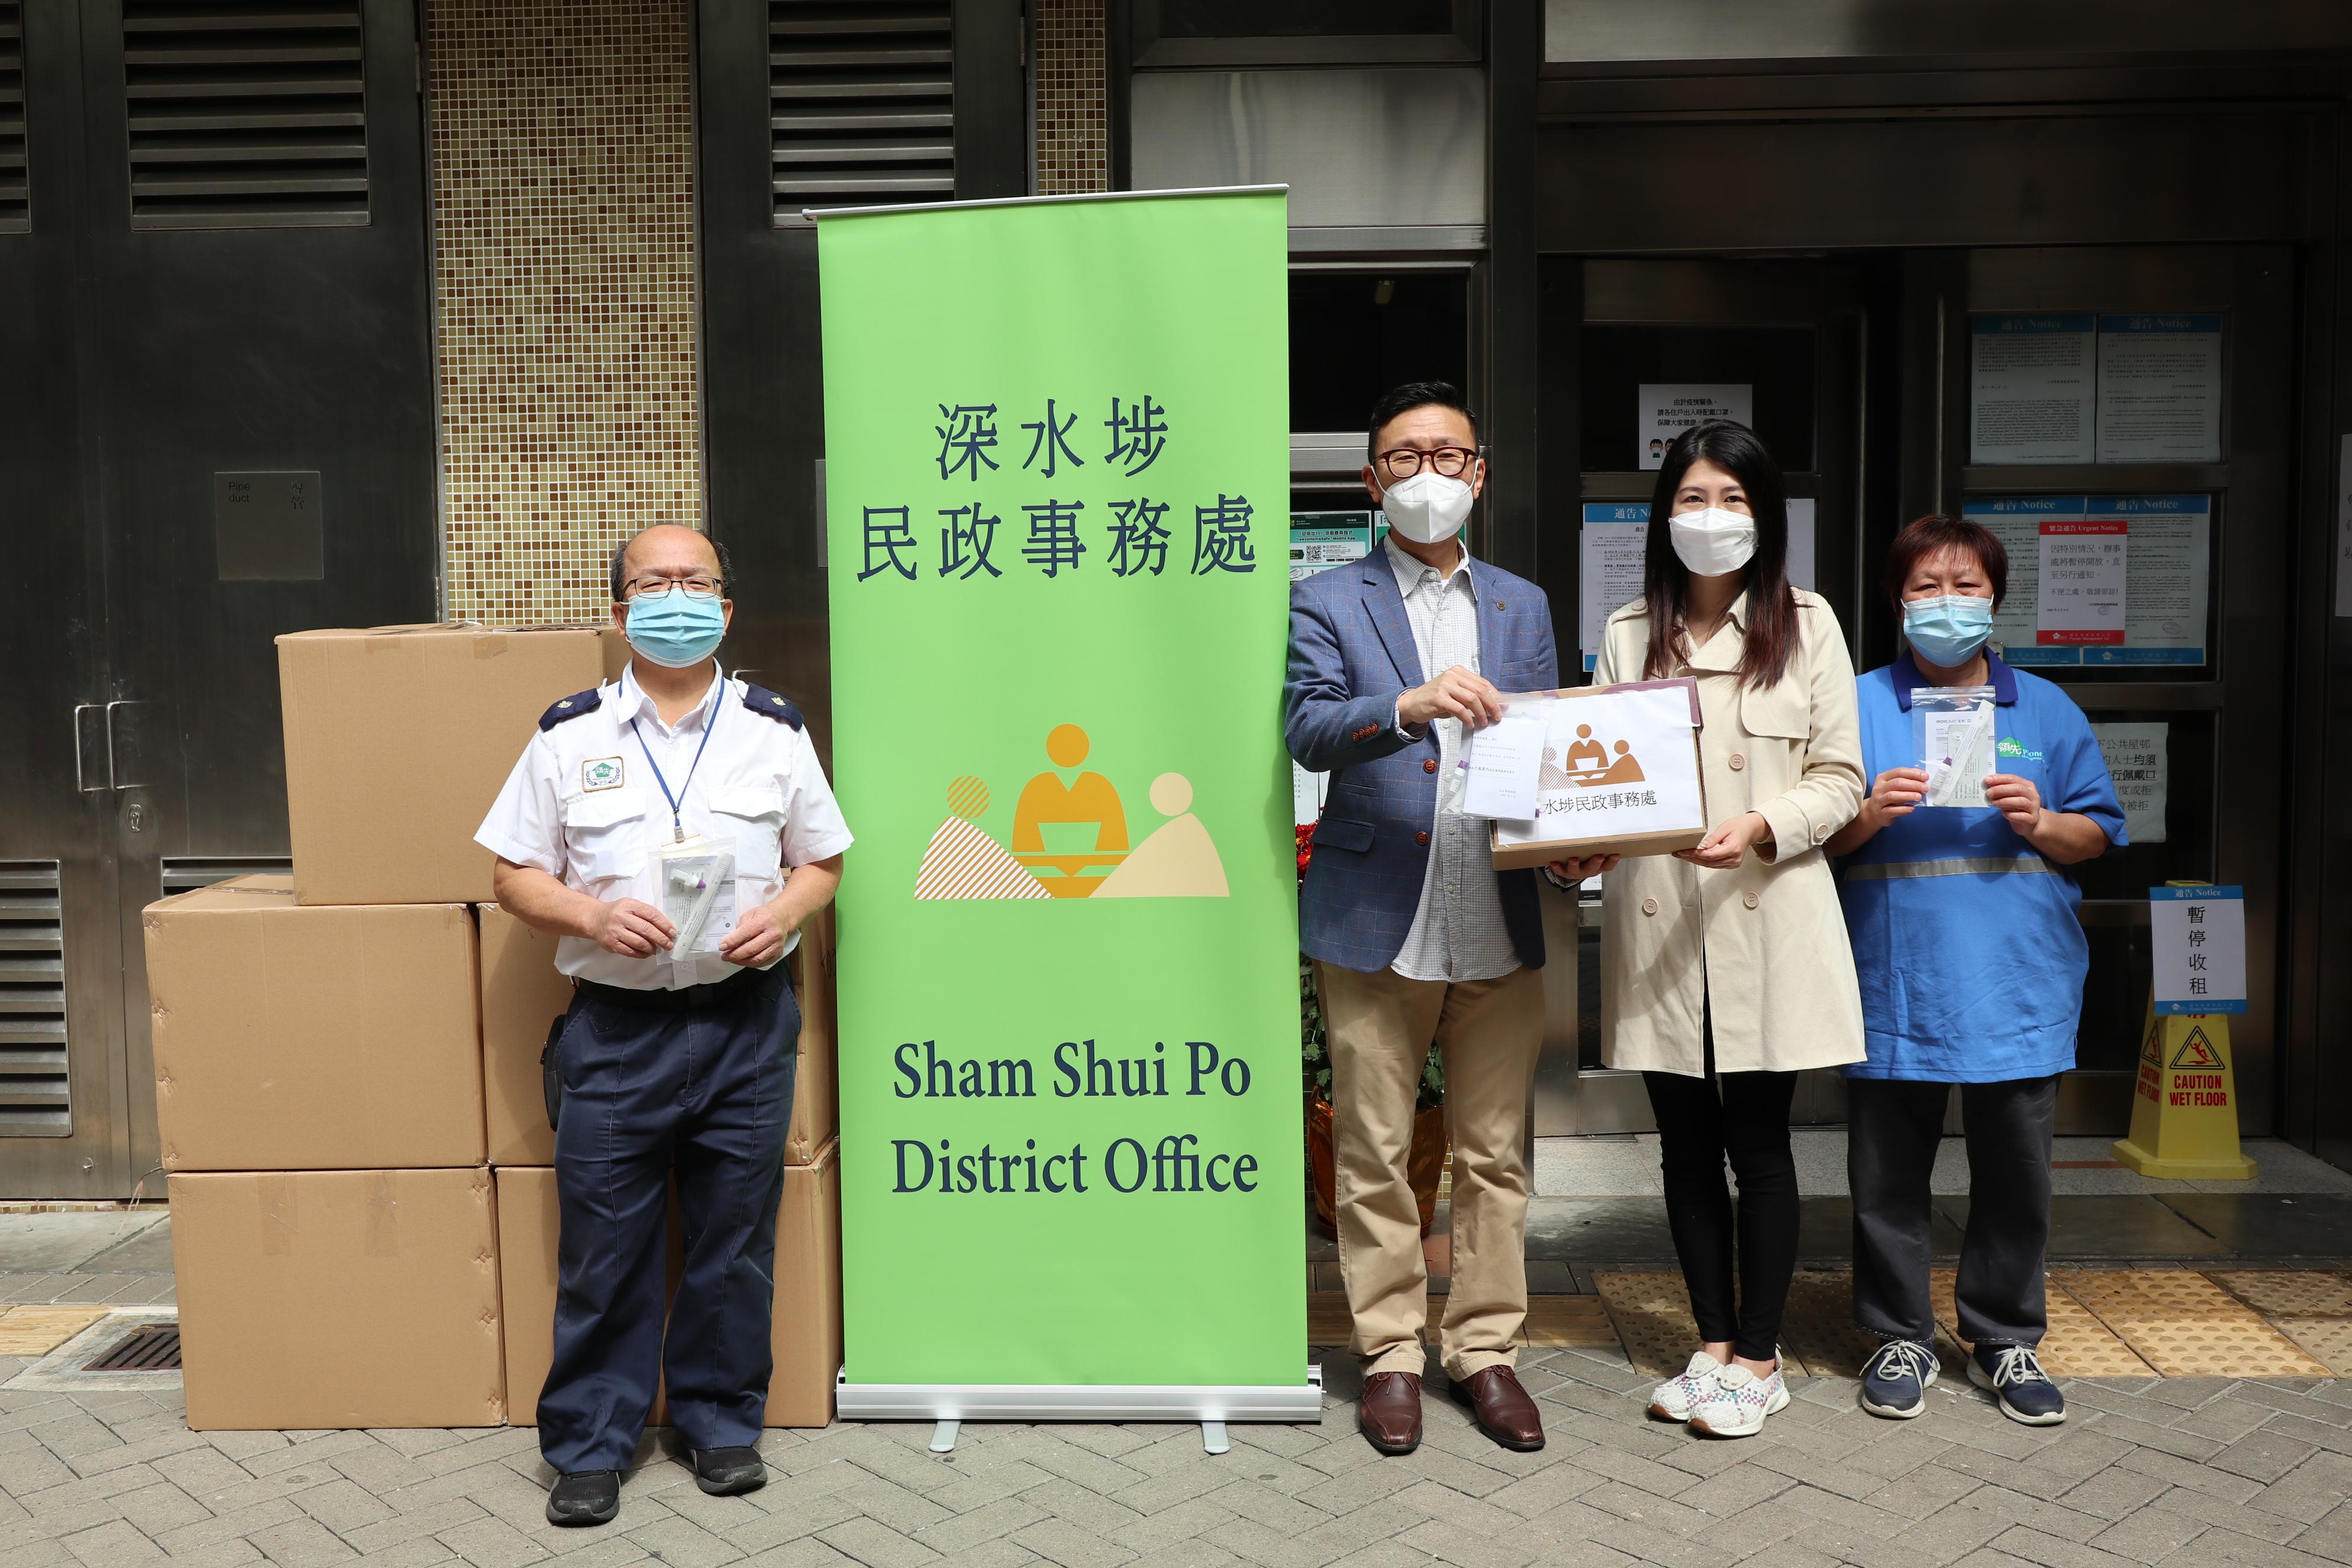 The Sham Shui Po District Office today (February 12) distributed rapid test kits to households, cleansing workers and property management staff living and working in Un Tai House, Un Wo House and Un Fung House for voluntary testing through the Housing Department and the property management company of Un Chau Estate.